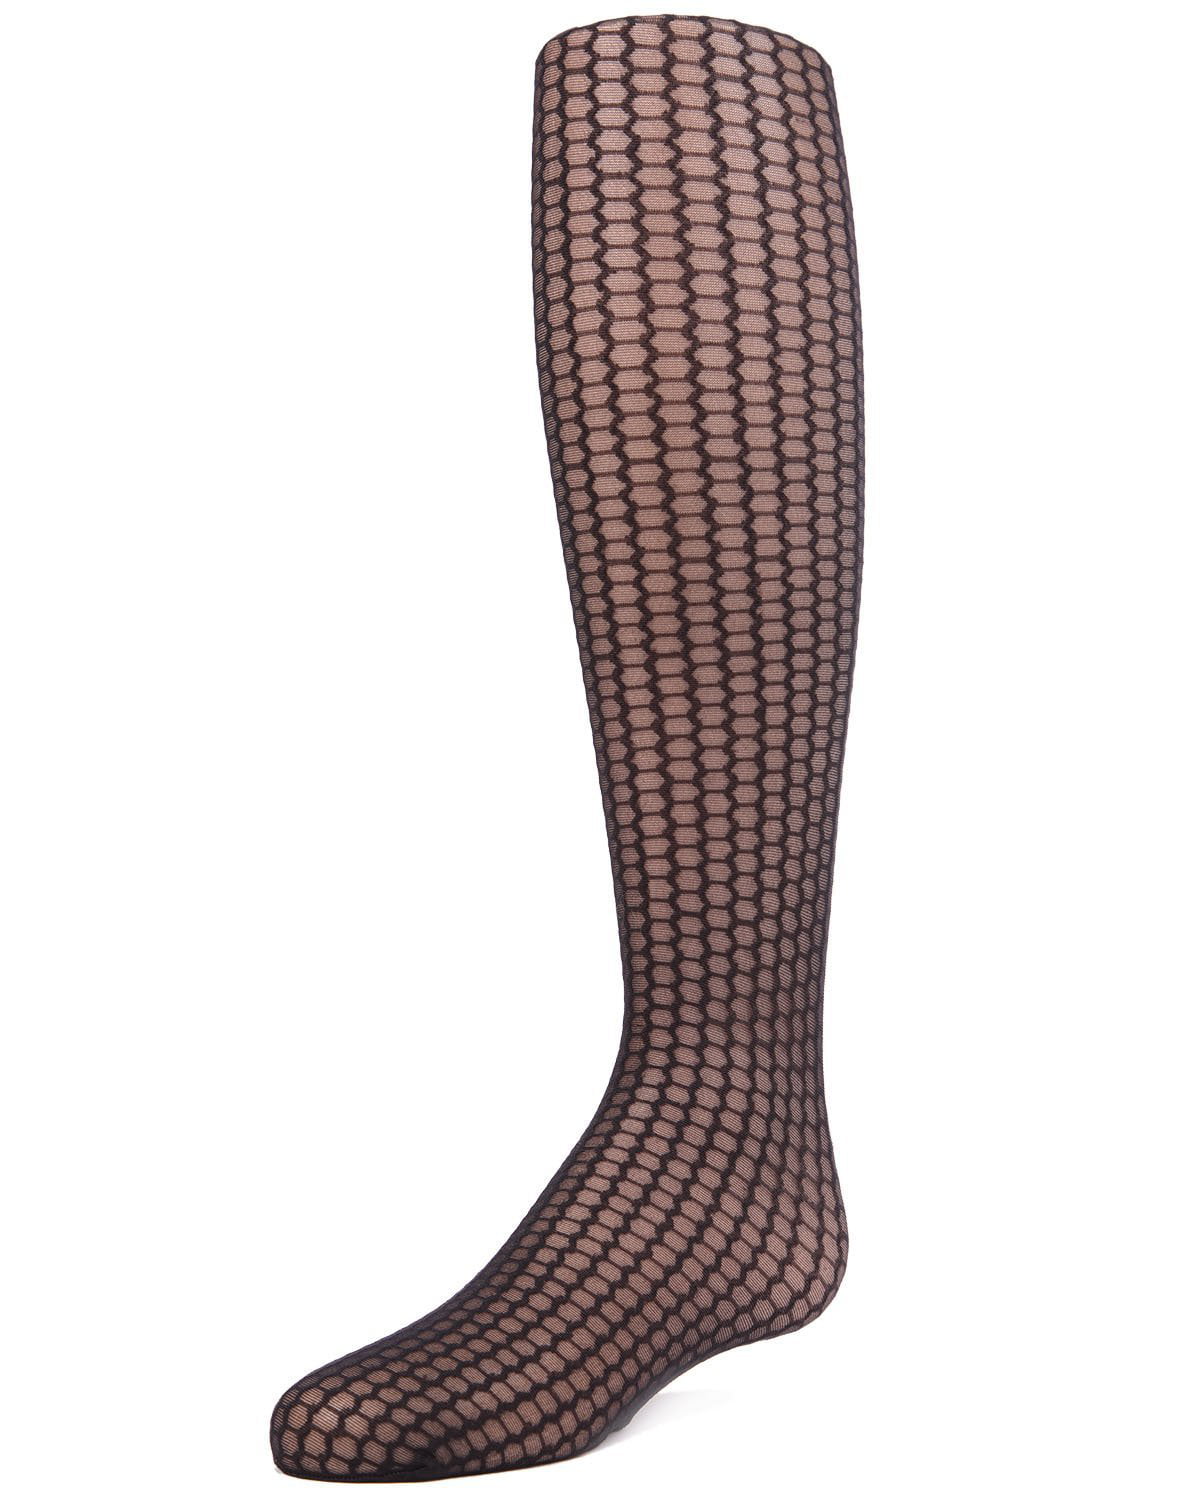 MeMoi - MeMoi Honeycomb Tights | Explore Sheer Tights for Girls by ...